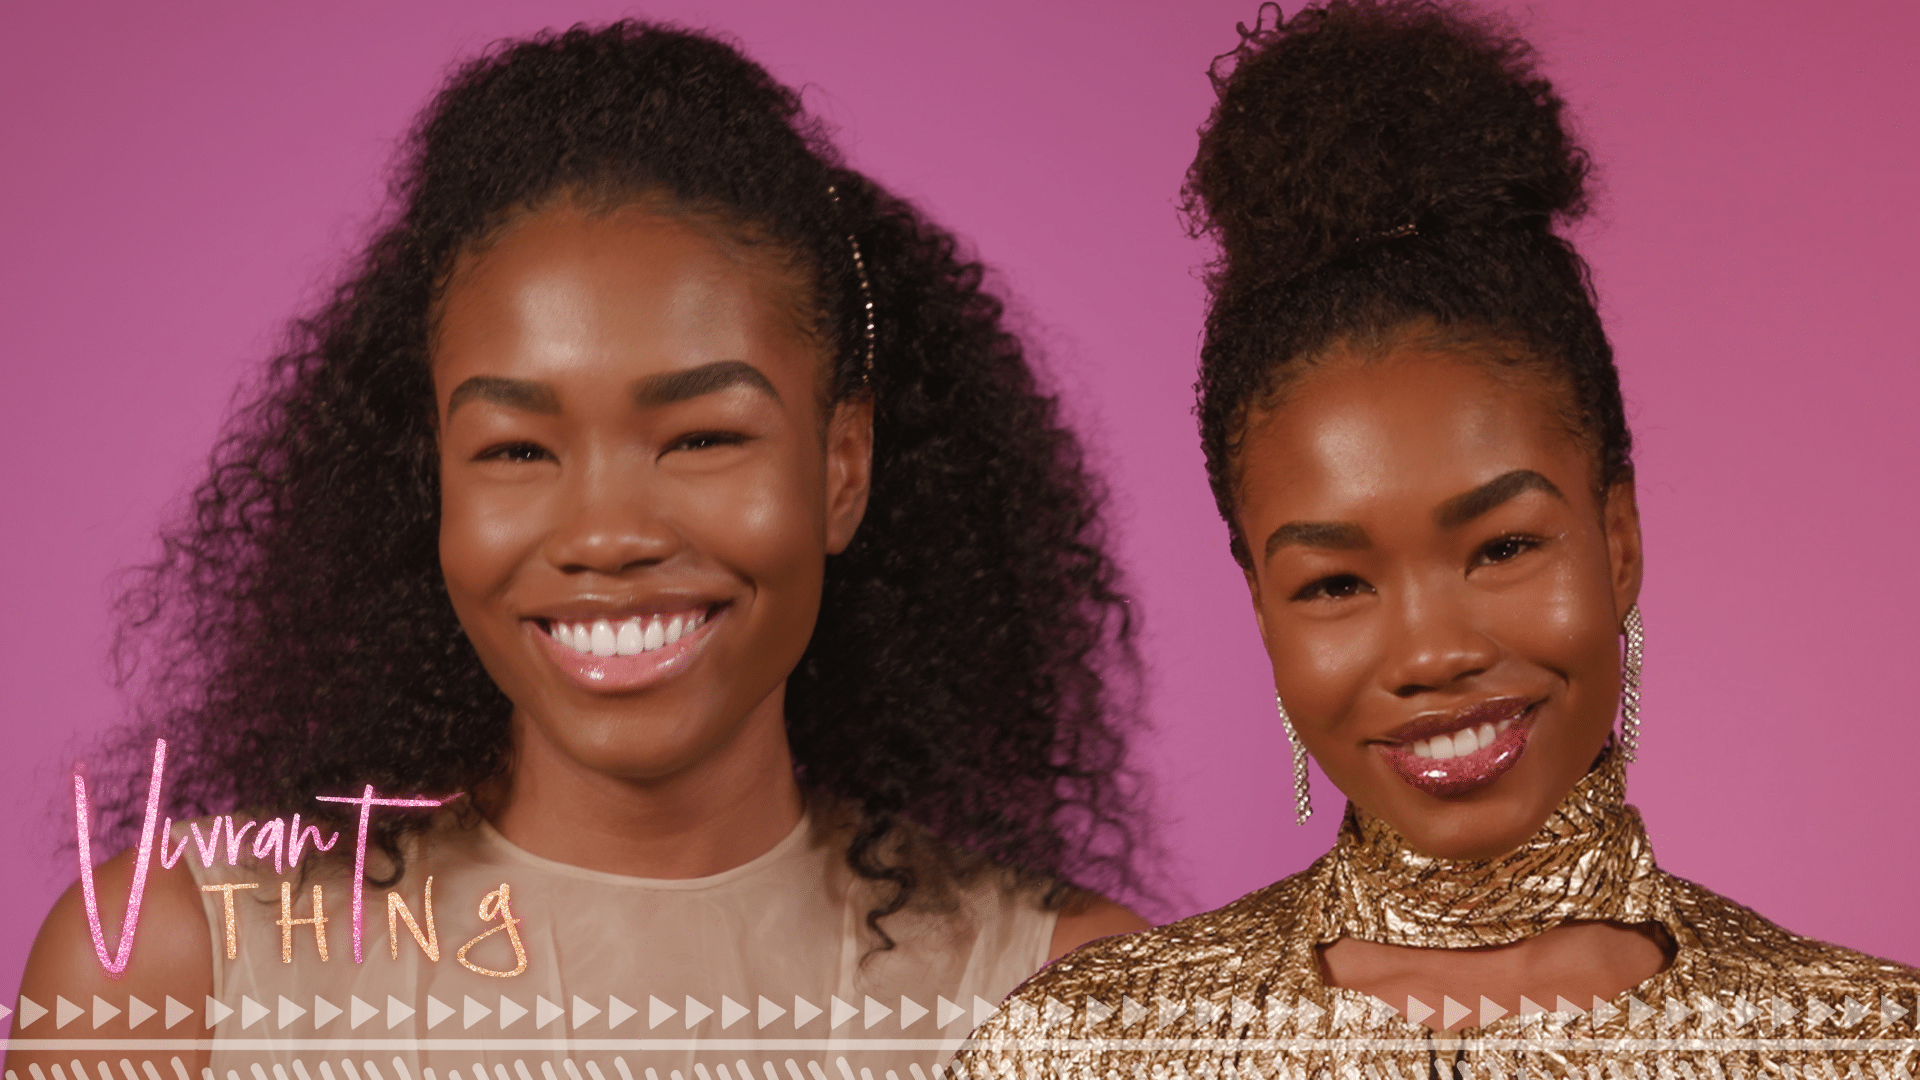 Watch Vivrant Thing: Enhance Your Natural Glow With This ‘2 Ways 2 Shine’ Tutorial